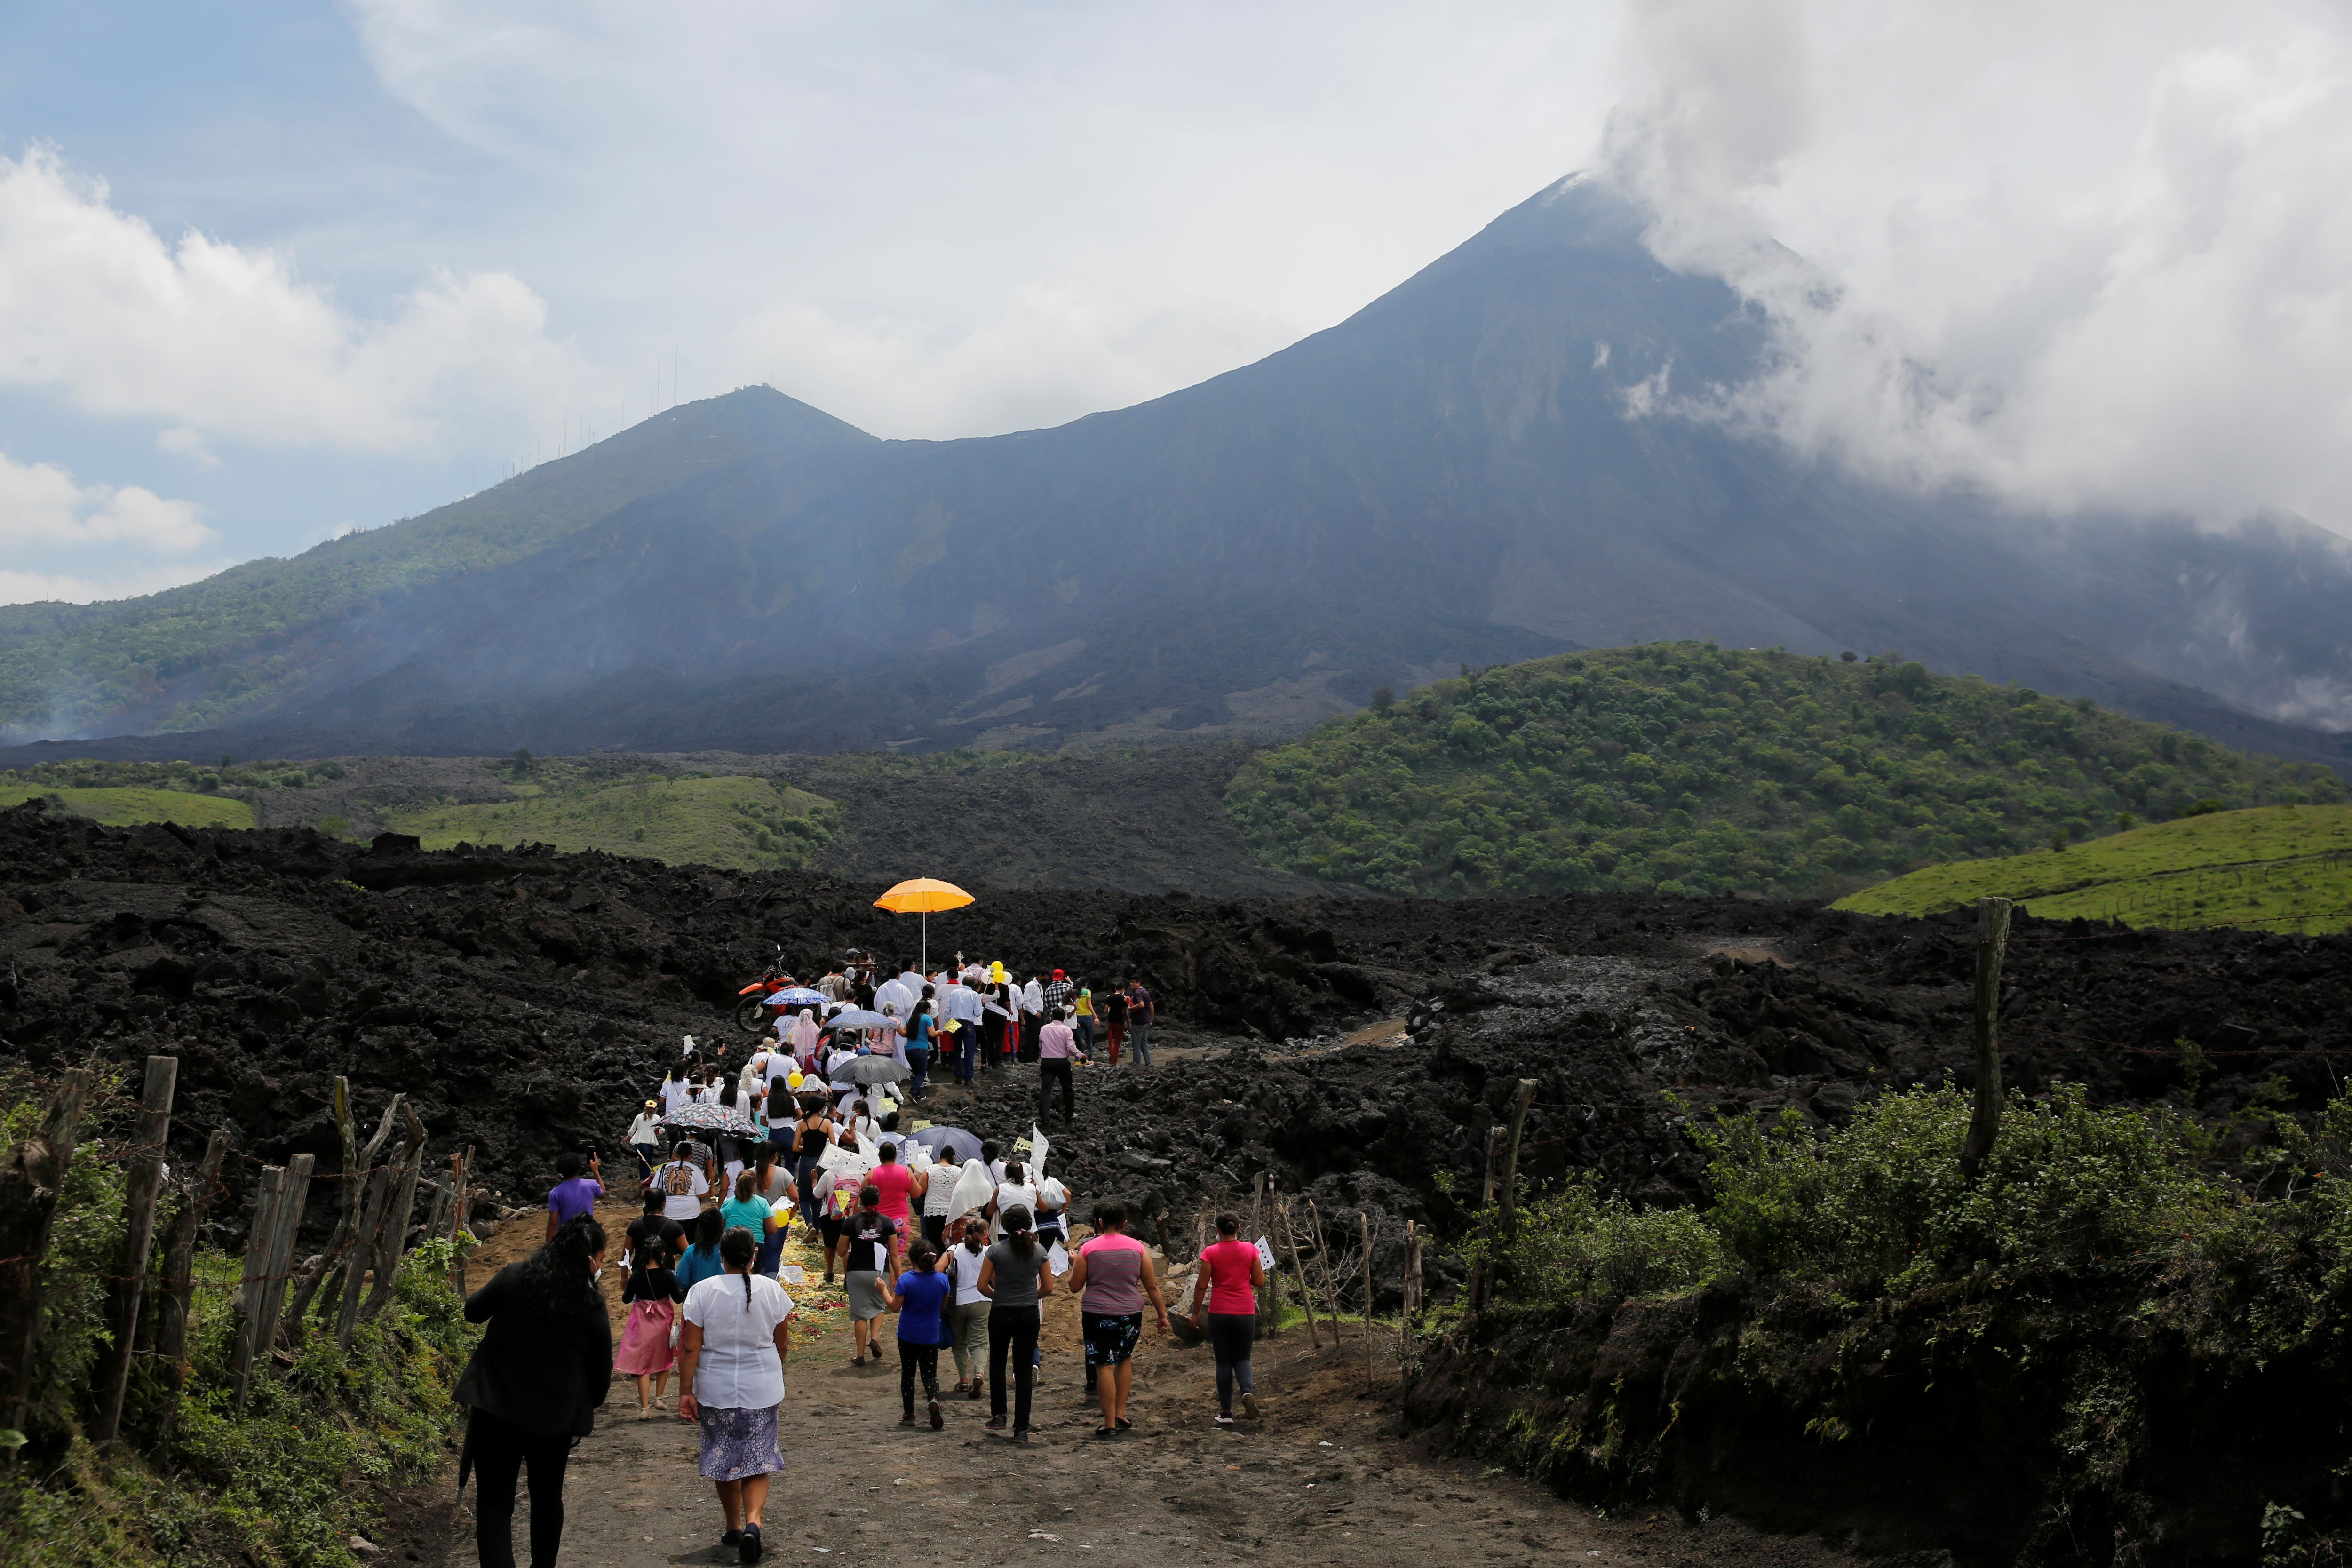 File|  A group of speakers called 'Cenaculos' participating in a procession to the Pacaya volcano in the Escuintla region, Guatemala, May, 2021. (REUTERS/Luis Echeverria)